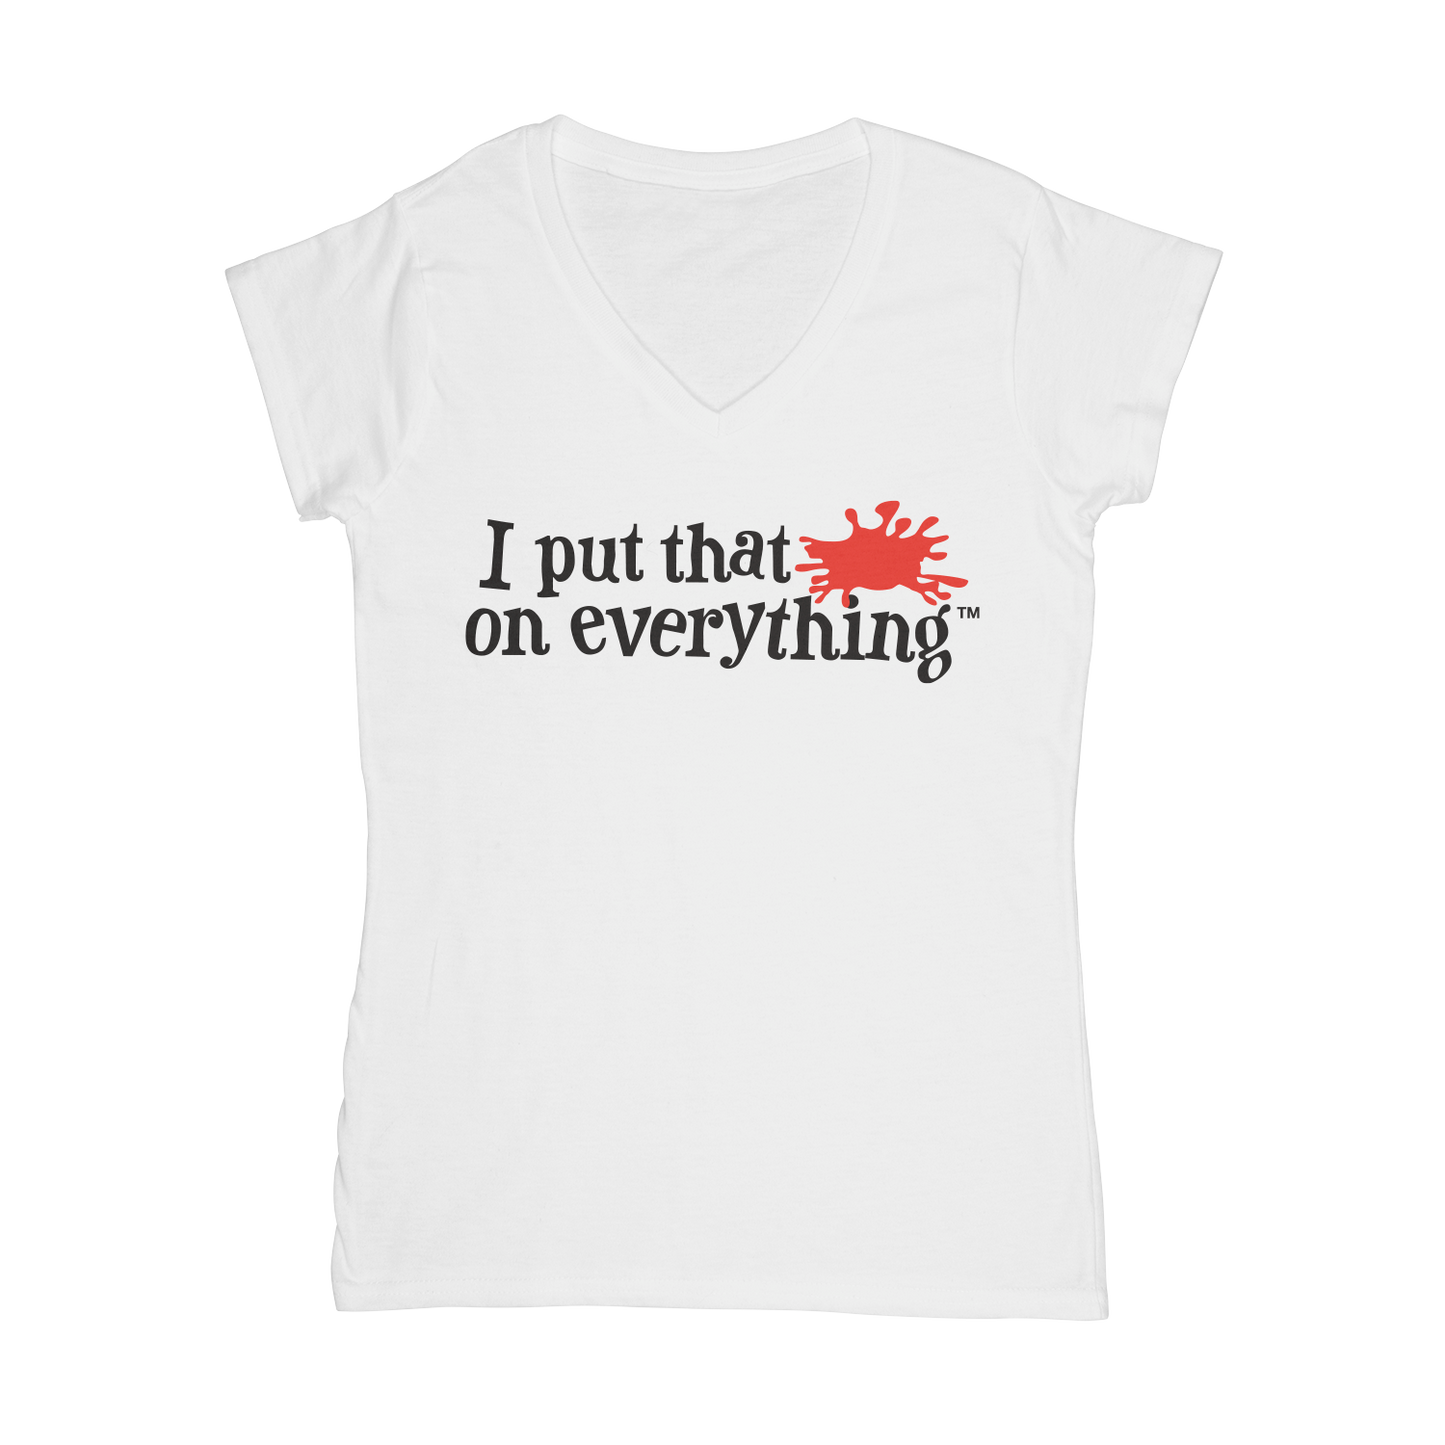 *PRE-ORDER* Frank's RedHot  "I Put That $#!T On Everything" Logo / Ladies V-Neck Shirt (Estimated Ship Date: 2/27) - Route One Apparel